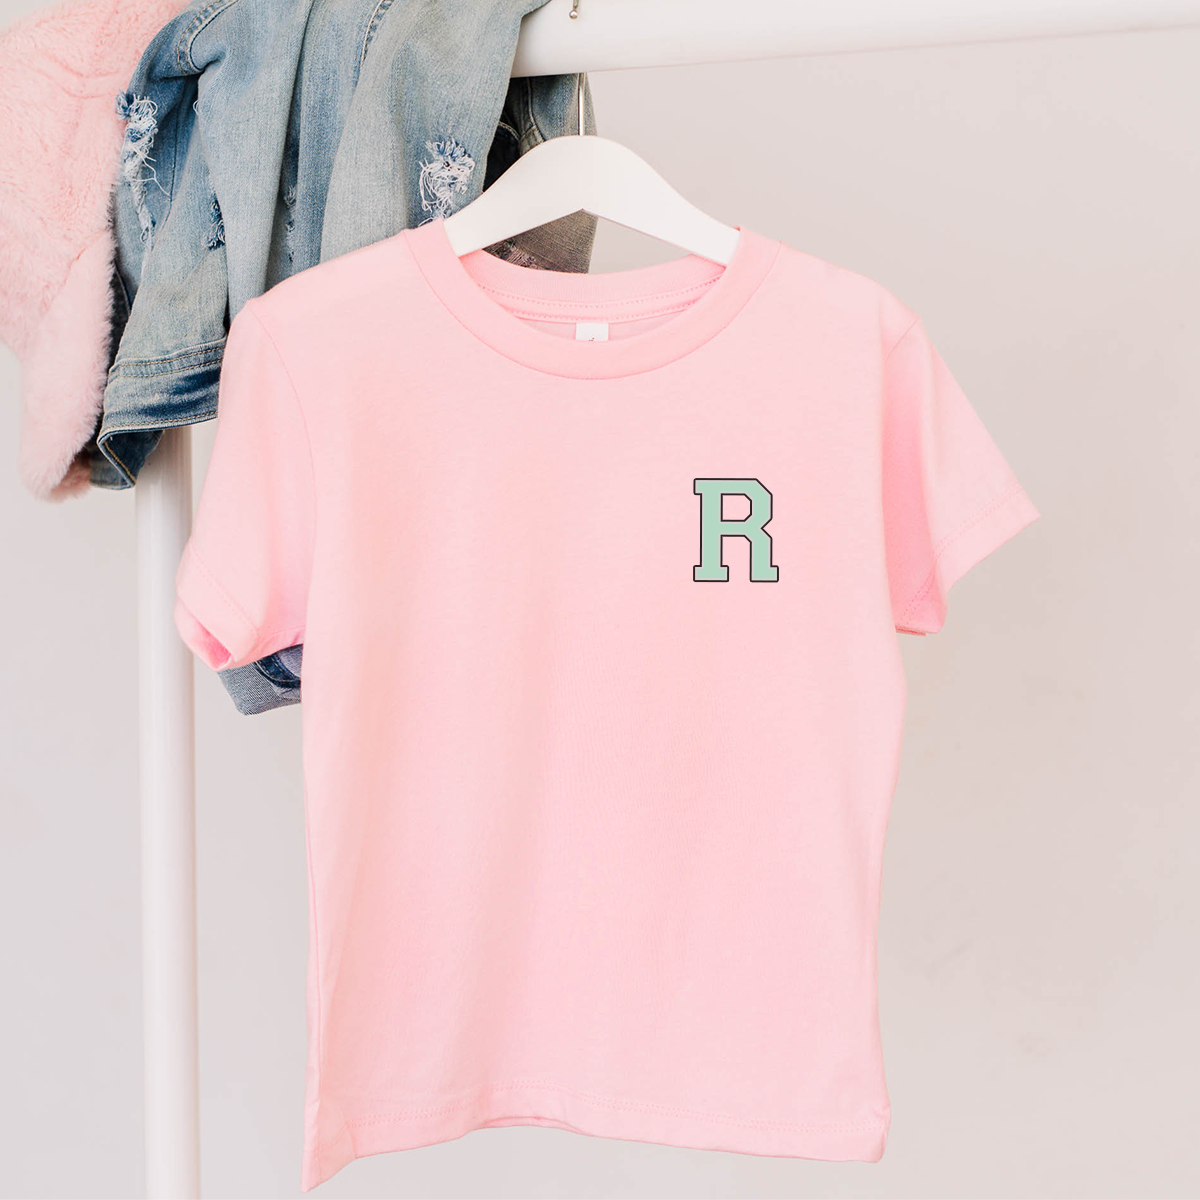 MiniVIP© Personalised Varisty Letters Baby Pink T-Shirt